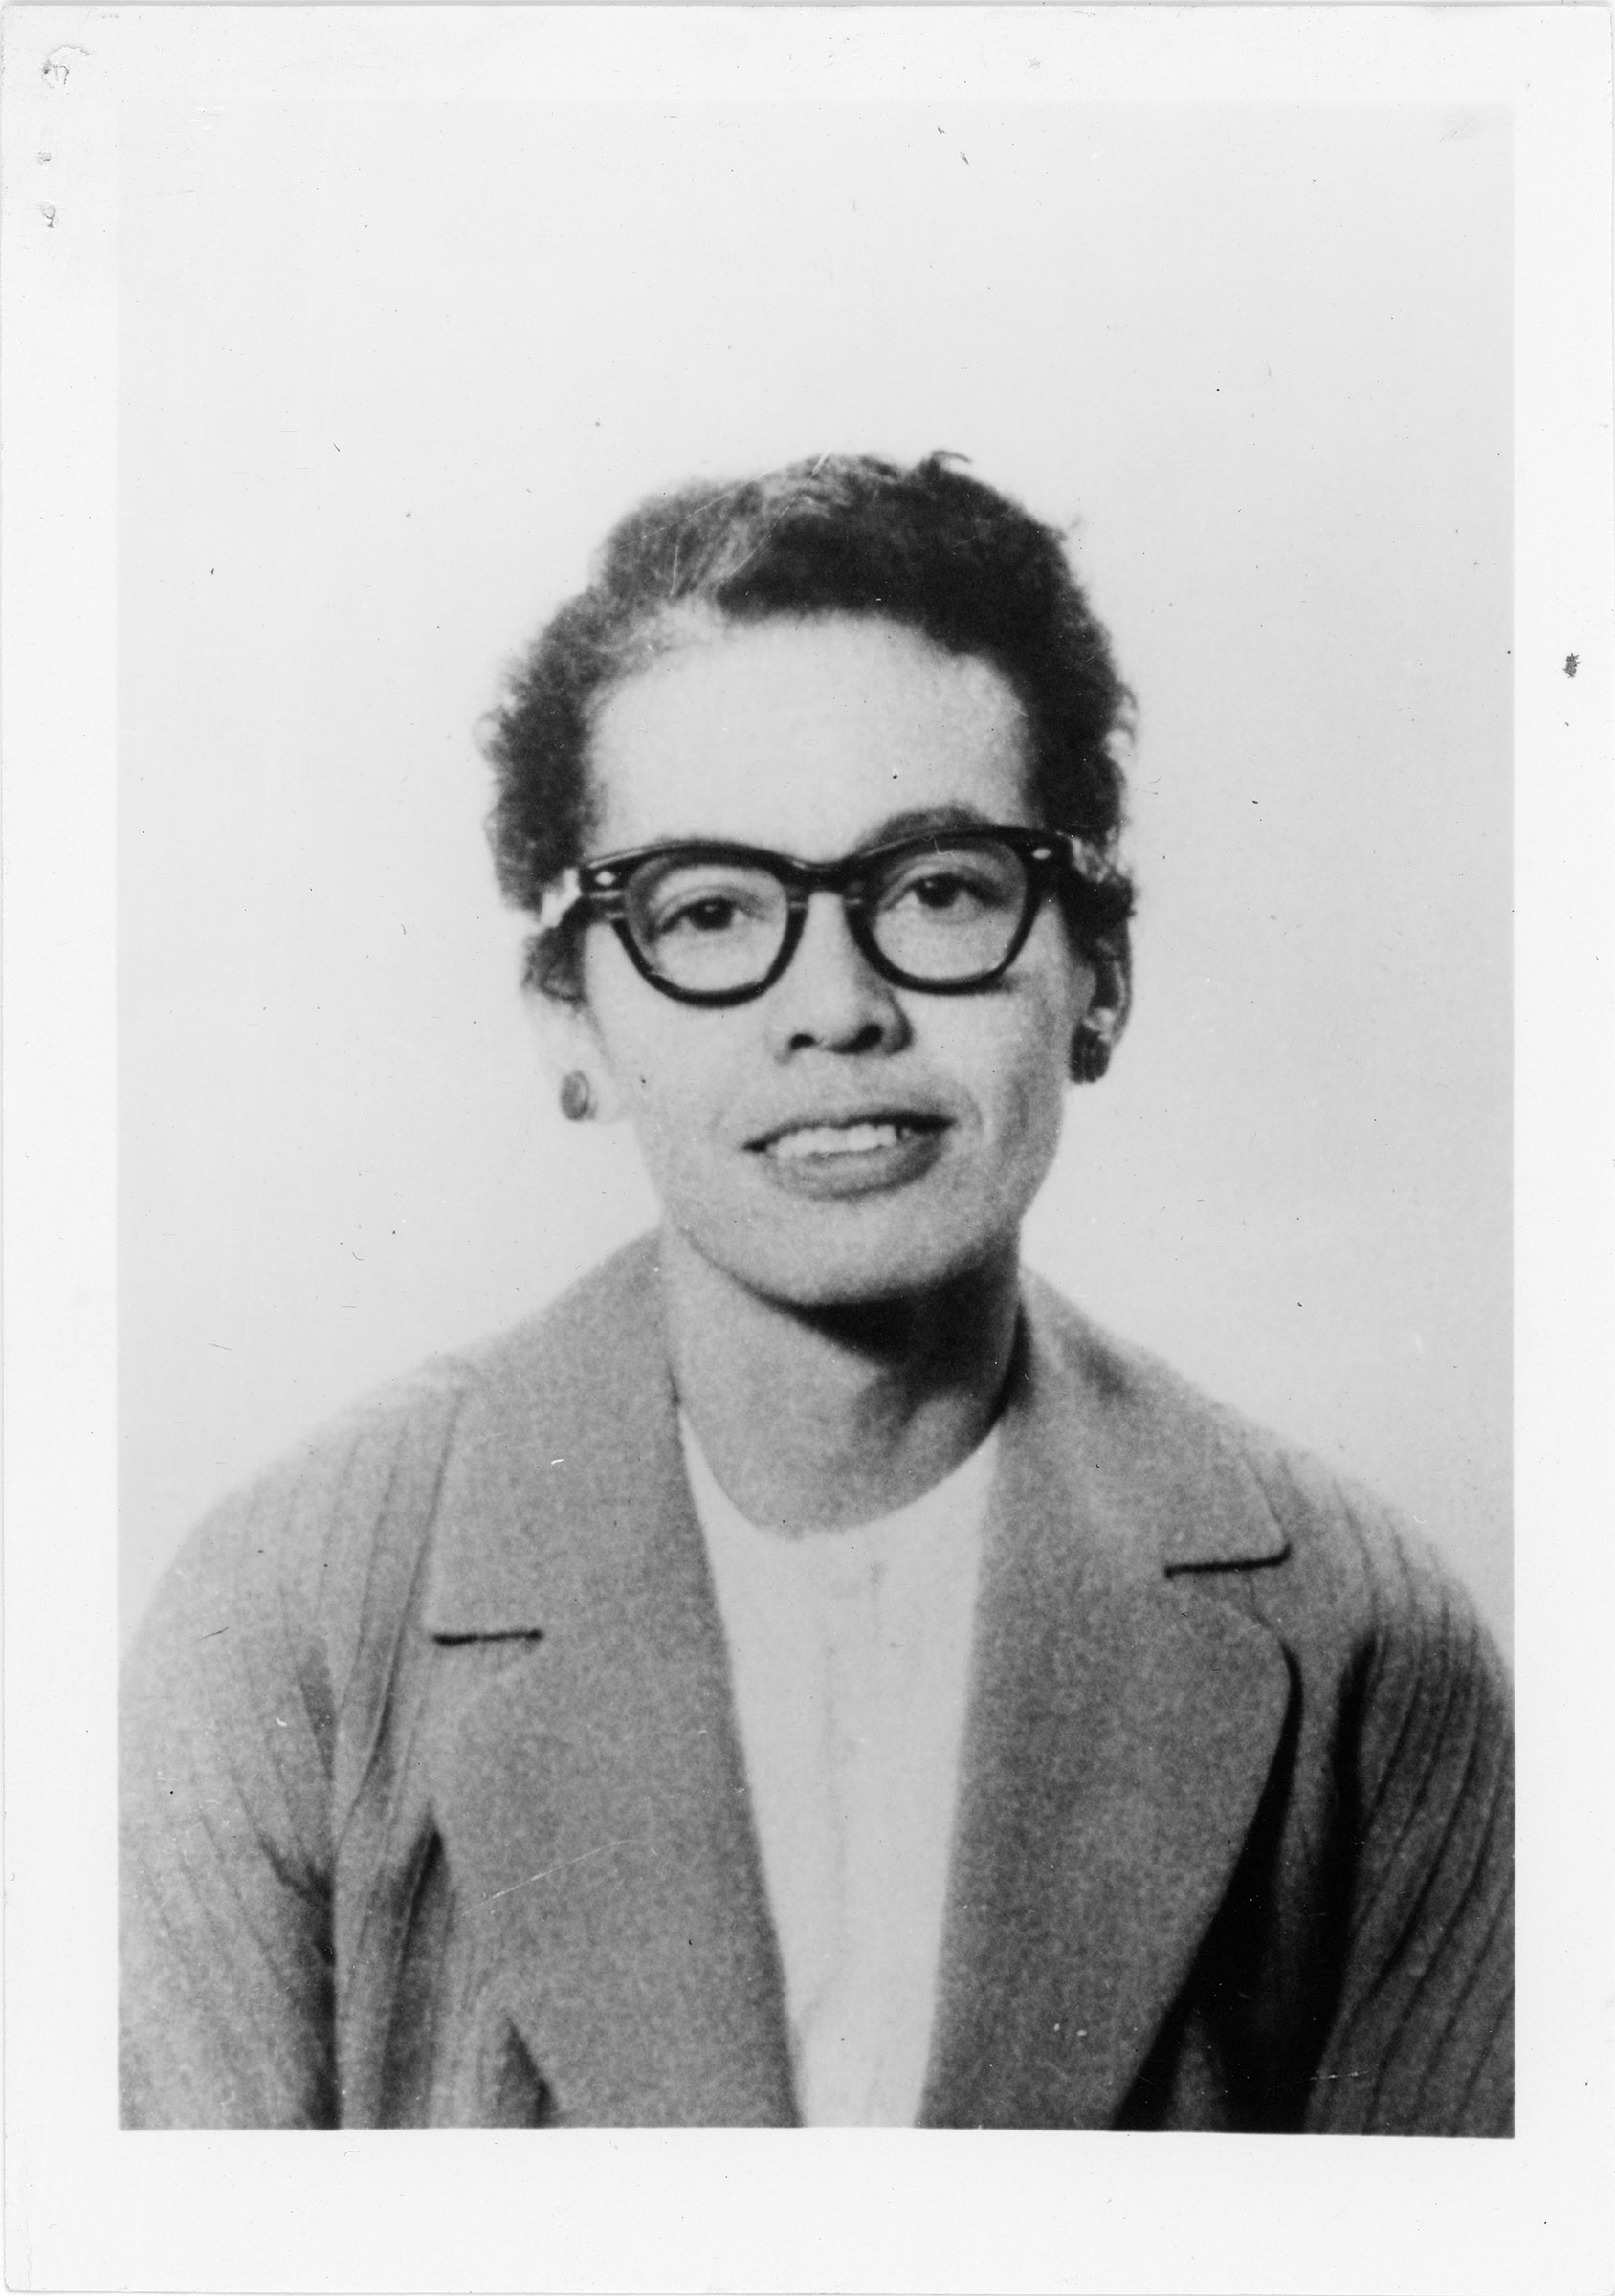 Dr. Pauli Murray in an undated photo. Photo courtesy of the FDR Presidential Library & Museum/Flickr/Creative Commons